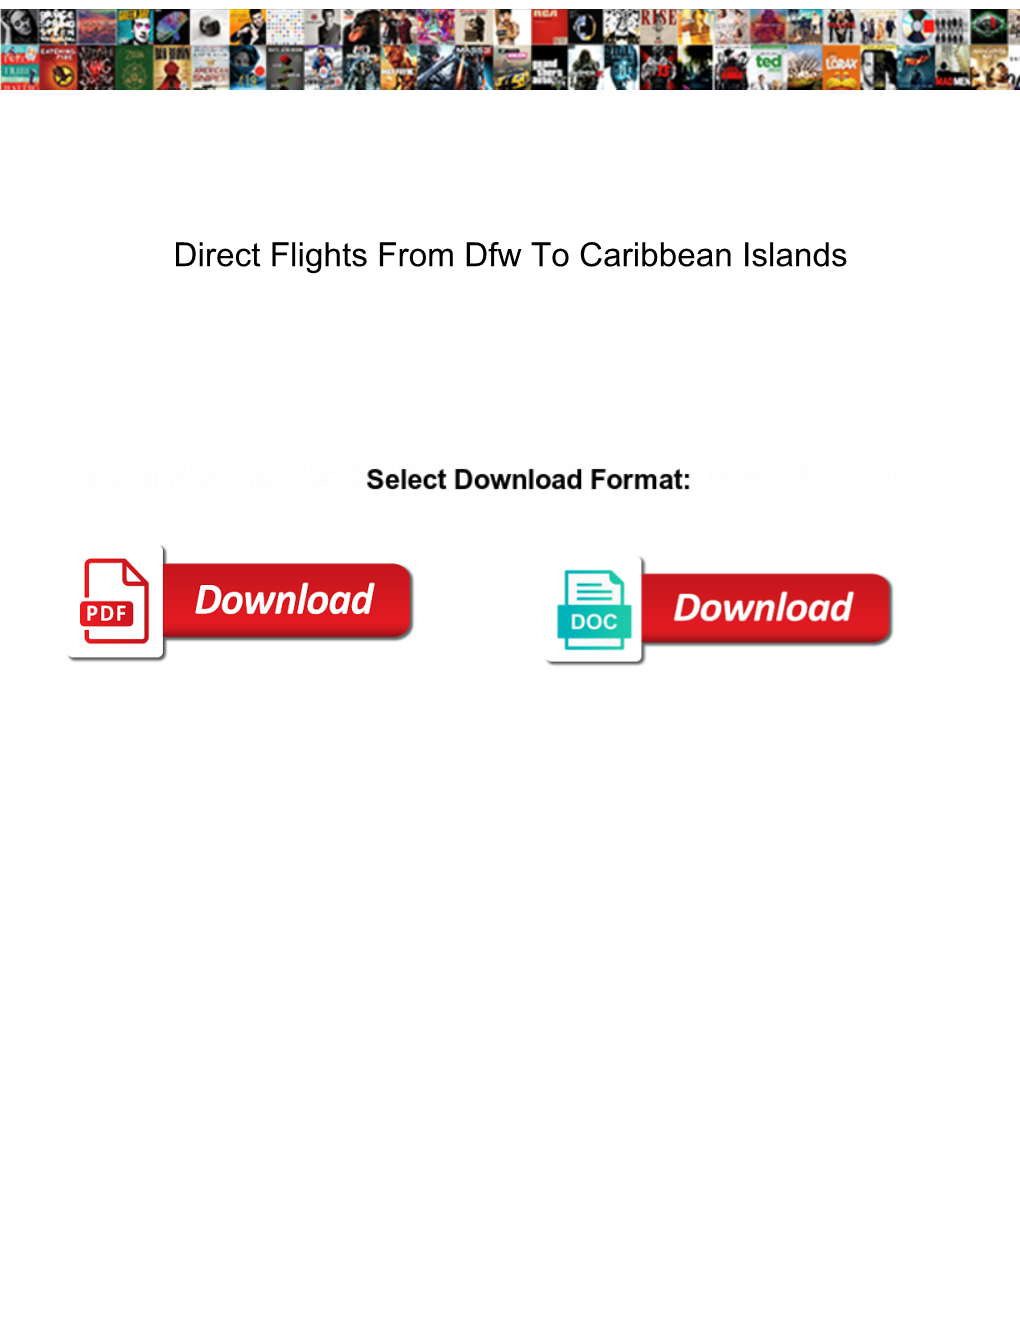 Direct Flights from Dfw to Caribbean Islands